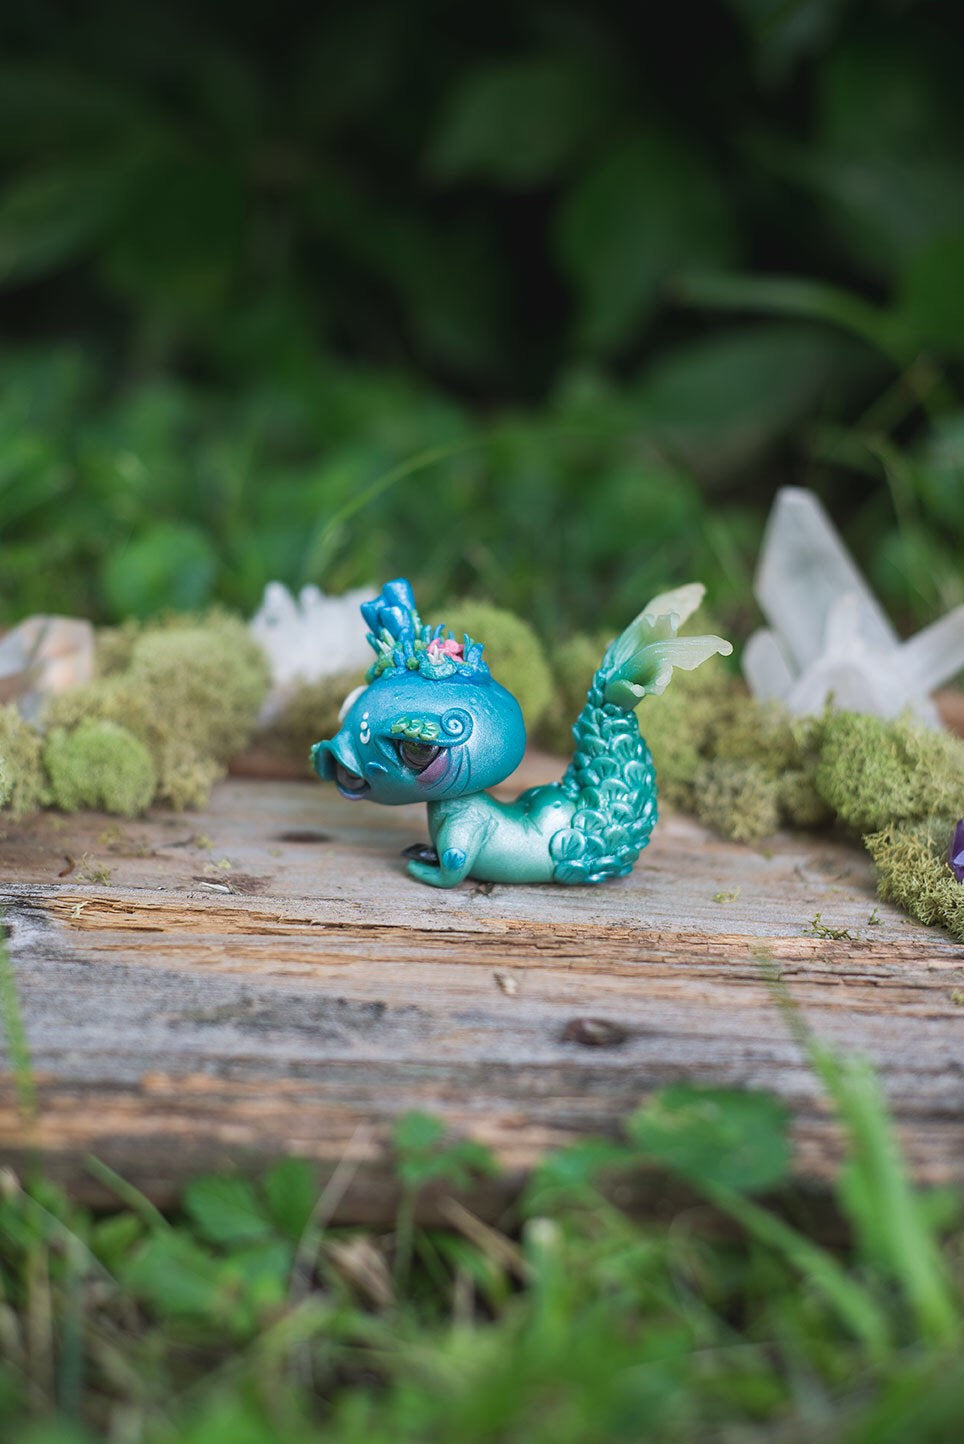 Left-Side View of Blue & Green Mermish - handmade polymer clay mermaid creature with coral reef on head holding obsidian